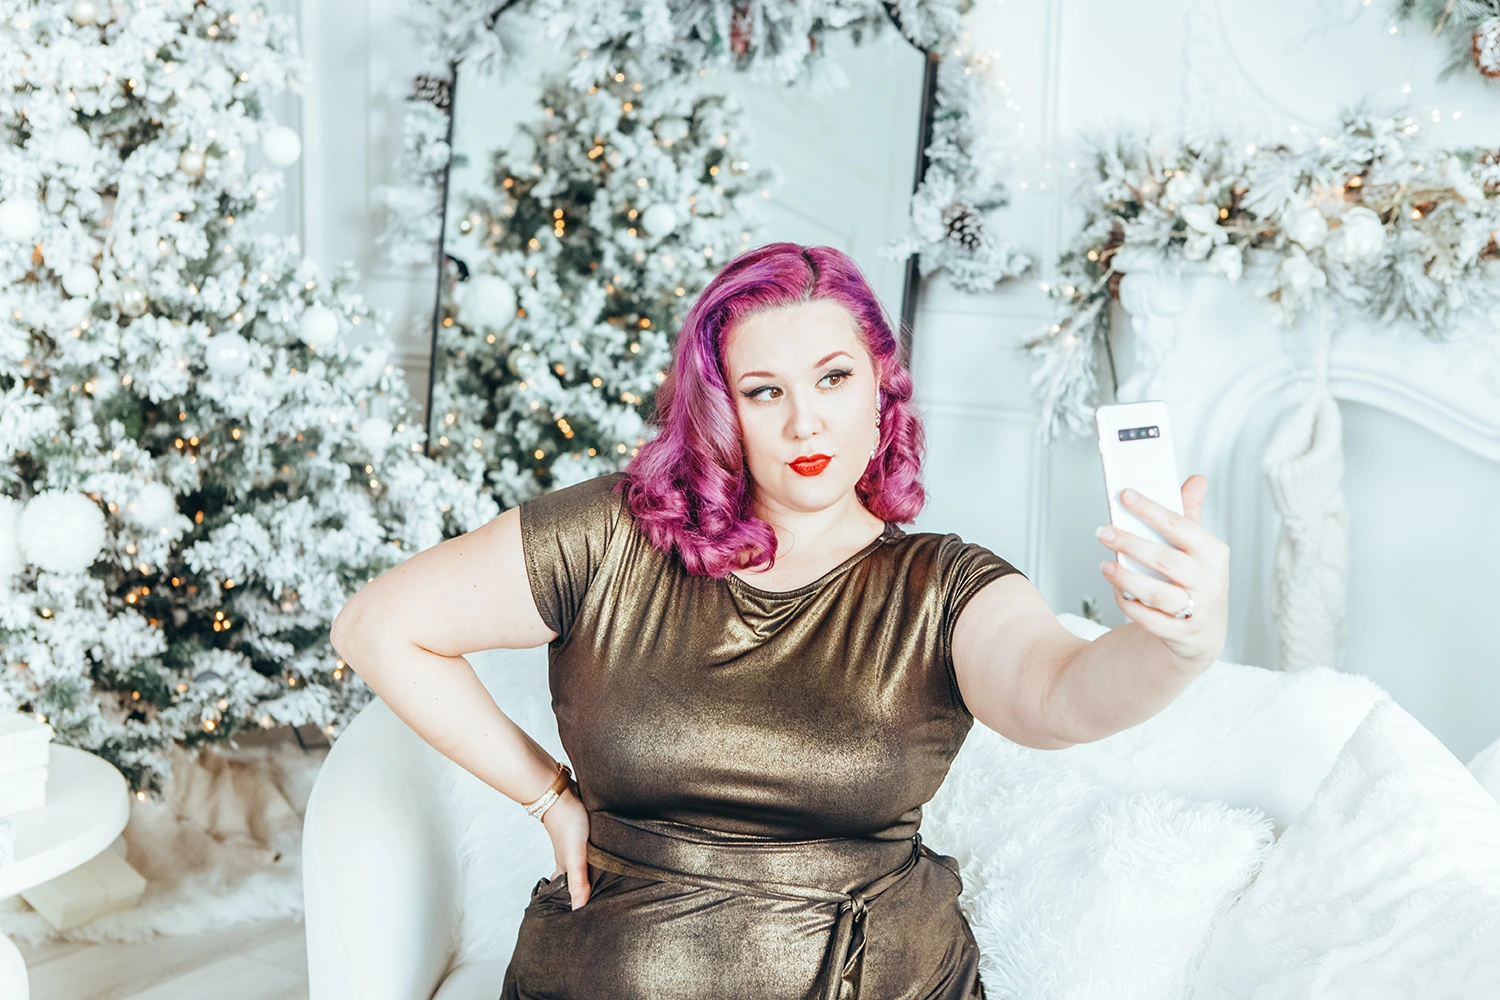 A woman taking a selfie in front of a Christmas tree during the holiday season.